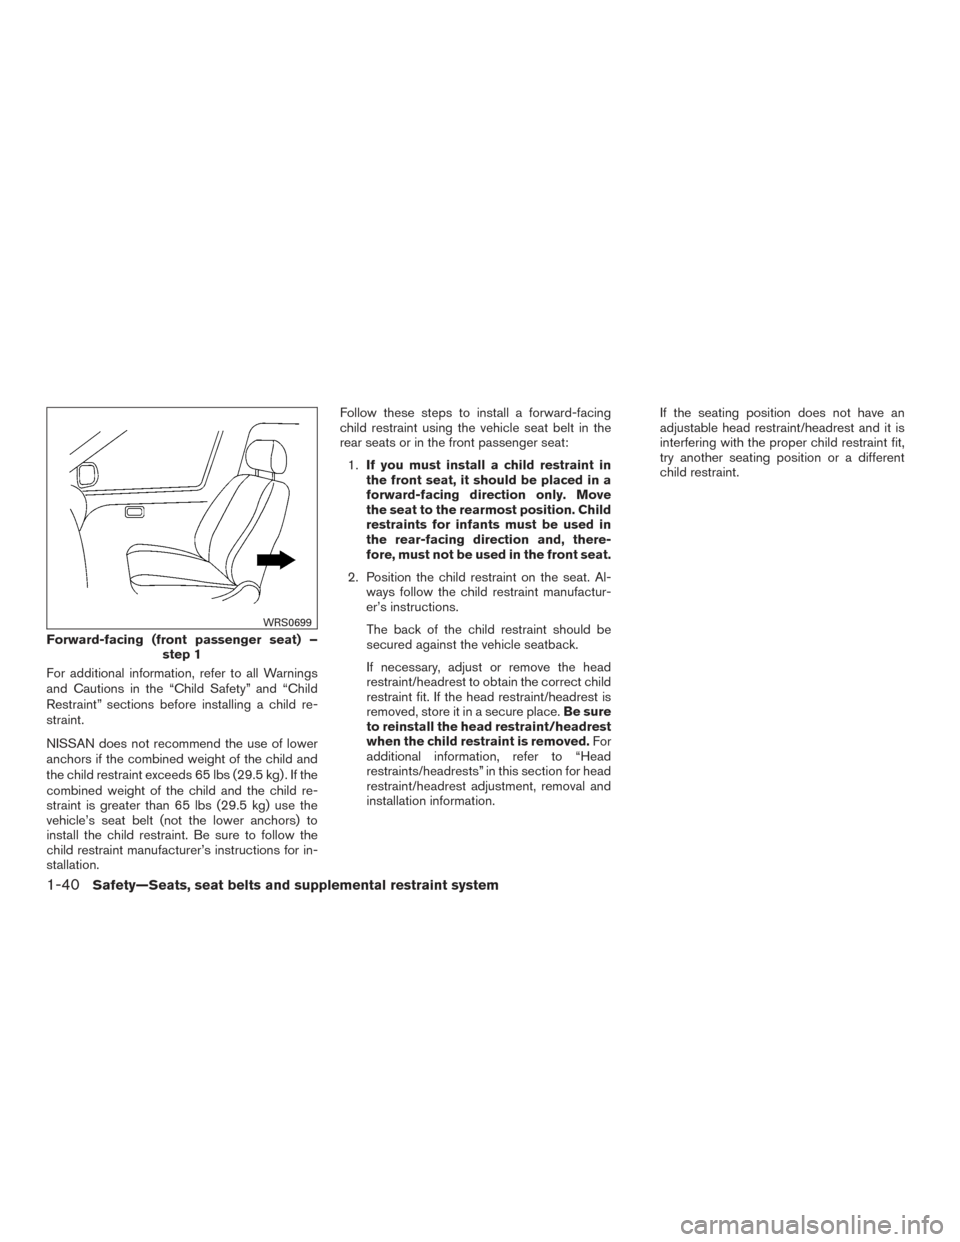 NISSAN XTERRA 2015 N50 / 2.G Workshop Manual For additional information, refer to all Warnings
and Cautions in the “Child Safety” and “Child
Restraint” sections before installing a child re-
straint.
NISSAN does not recommend the use of 